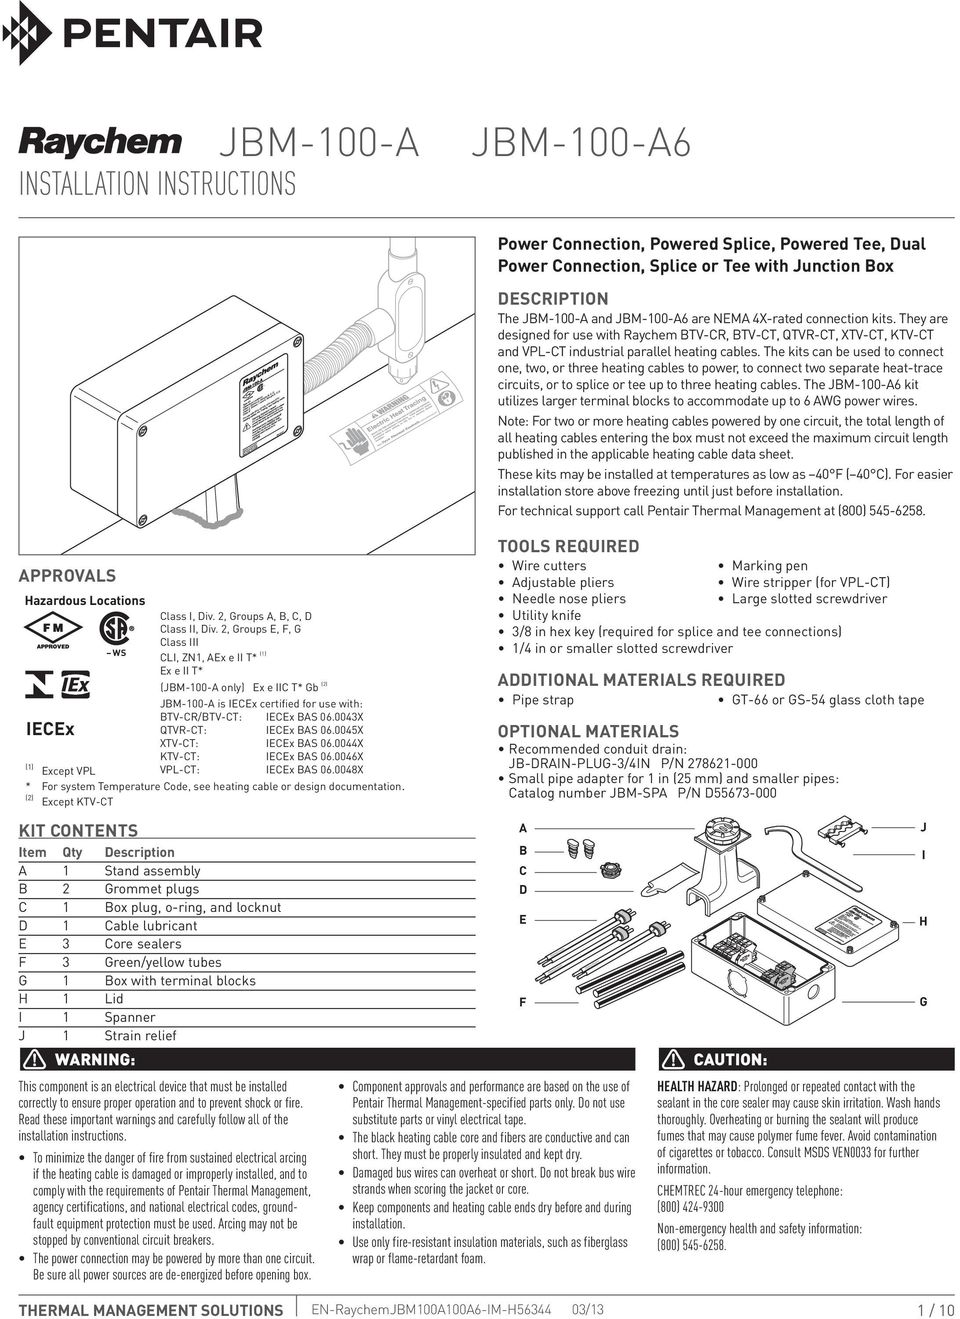 The kits can be used to connect one, two, or three heating cables to power, to connect two separate heat-trace circuits, or to splice or tee up to three heating cables.